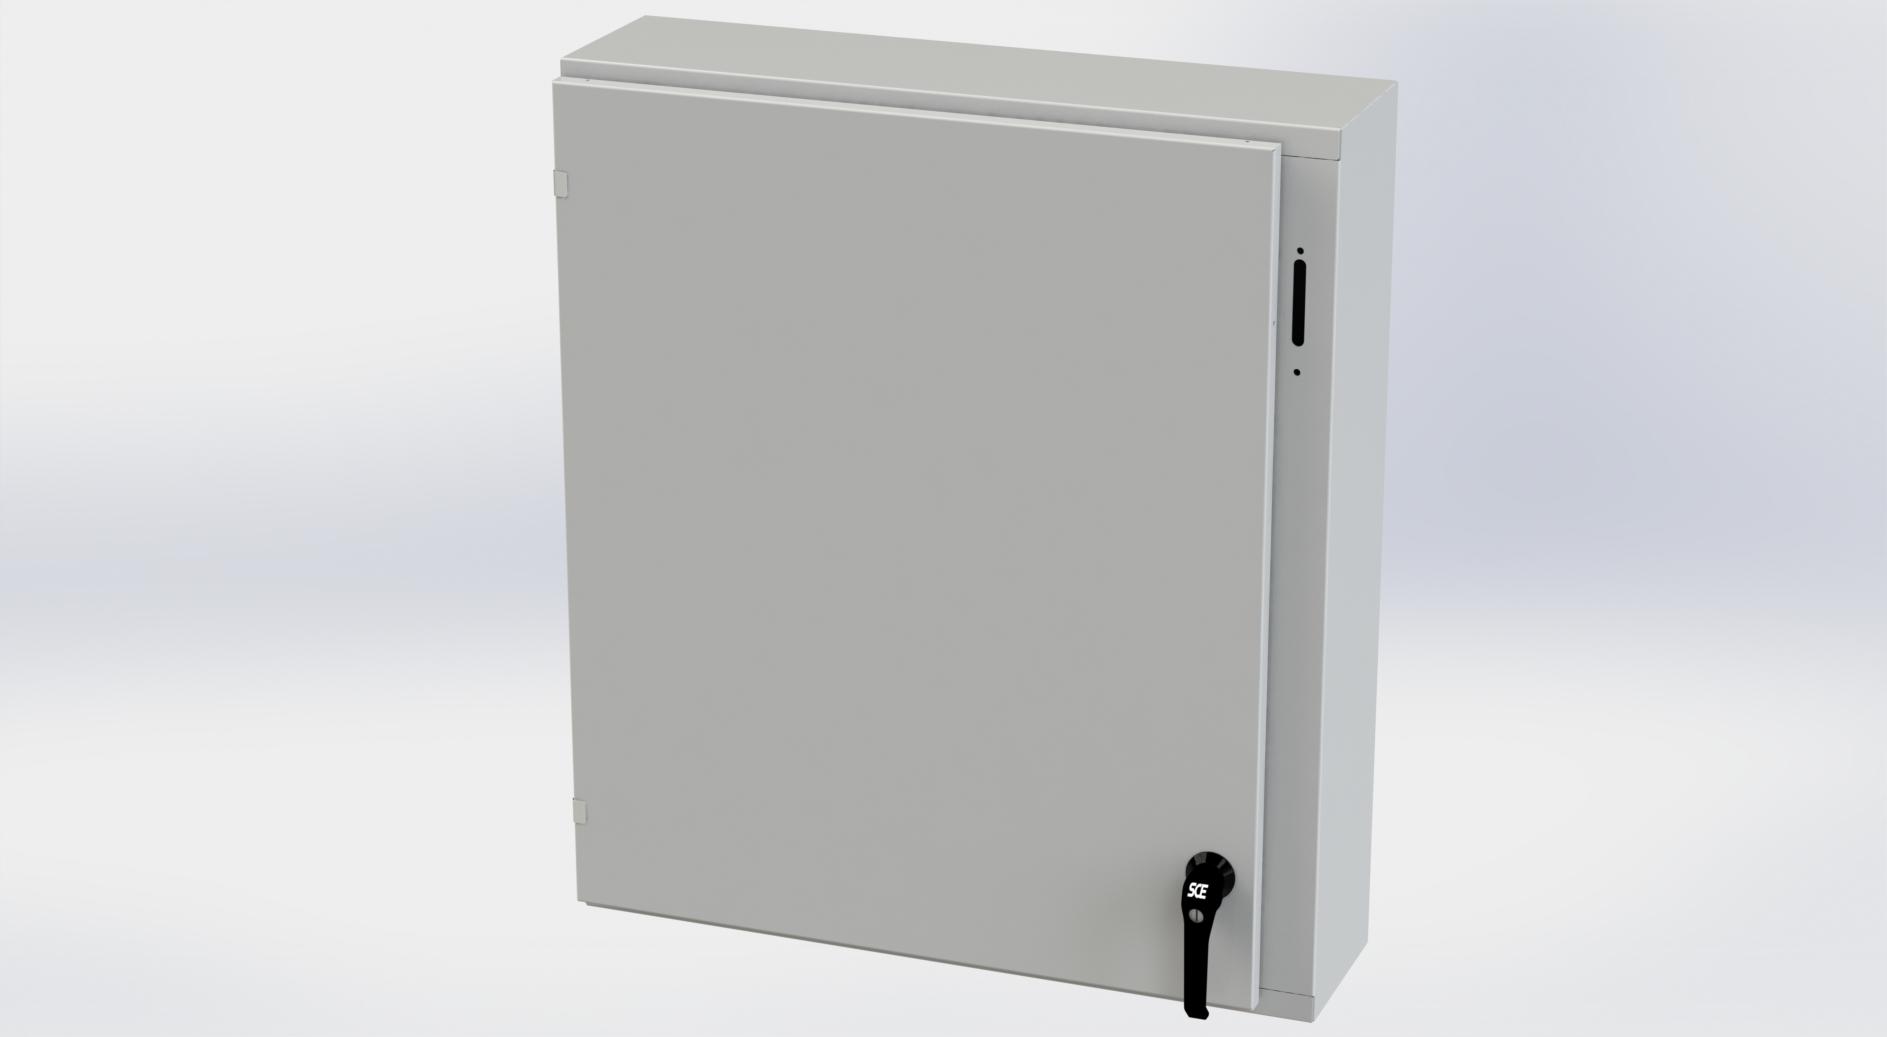 Saginaw Control SCE-36XEL3108LPLG XEL LP Enclosure, Height:36.00", Width:31.38", Depth:8.00", RAL 7035 gray powder coating inside and out. Optional sub-panels are powder coated white.